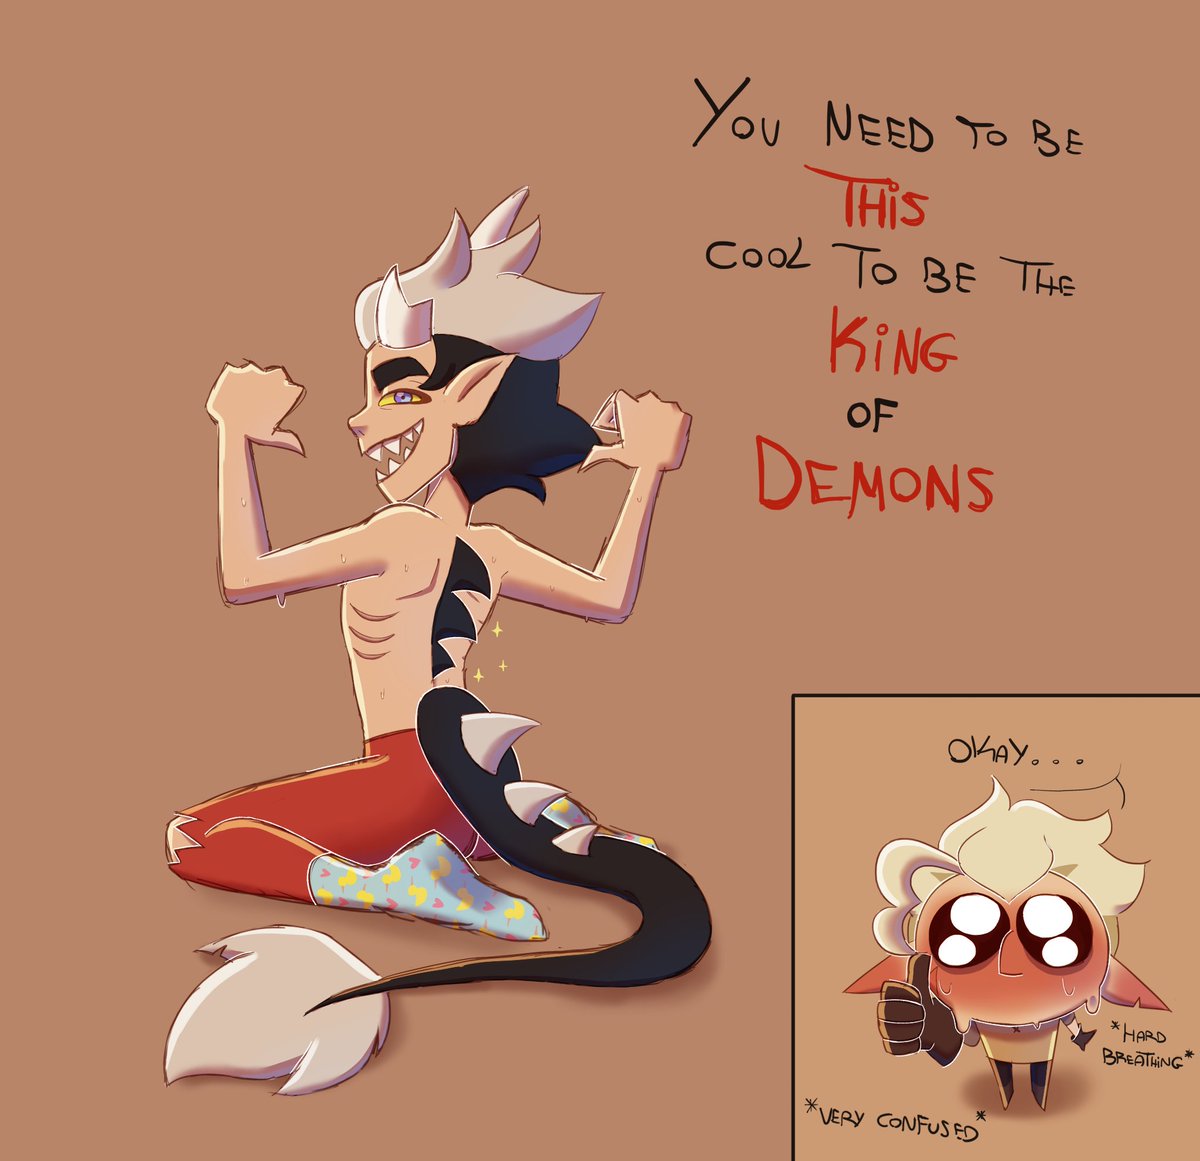 Hunter trains King to defend himself against Butcher (genderbend Boscha) at school. After a day of training, King ends up sweating and takes off his shirt, leading to the following image:

#toh #TohEsquizoAu #tohhunter #tohking #kinter #theowlhouse #huntertoh #kinhtoh